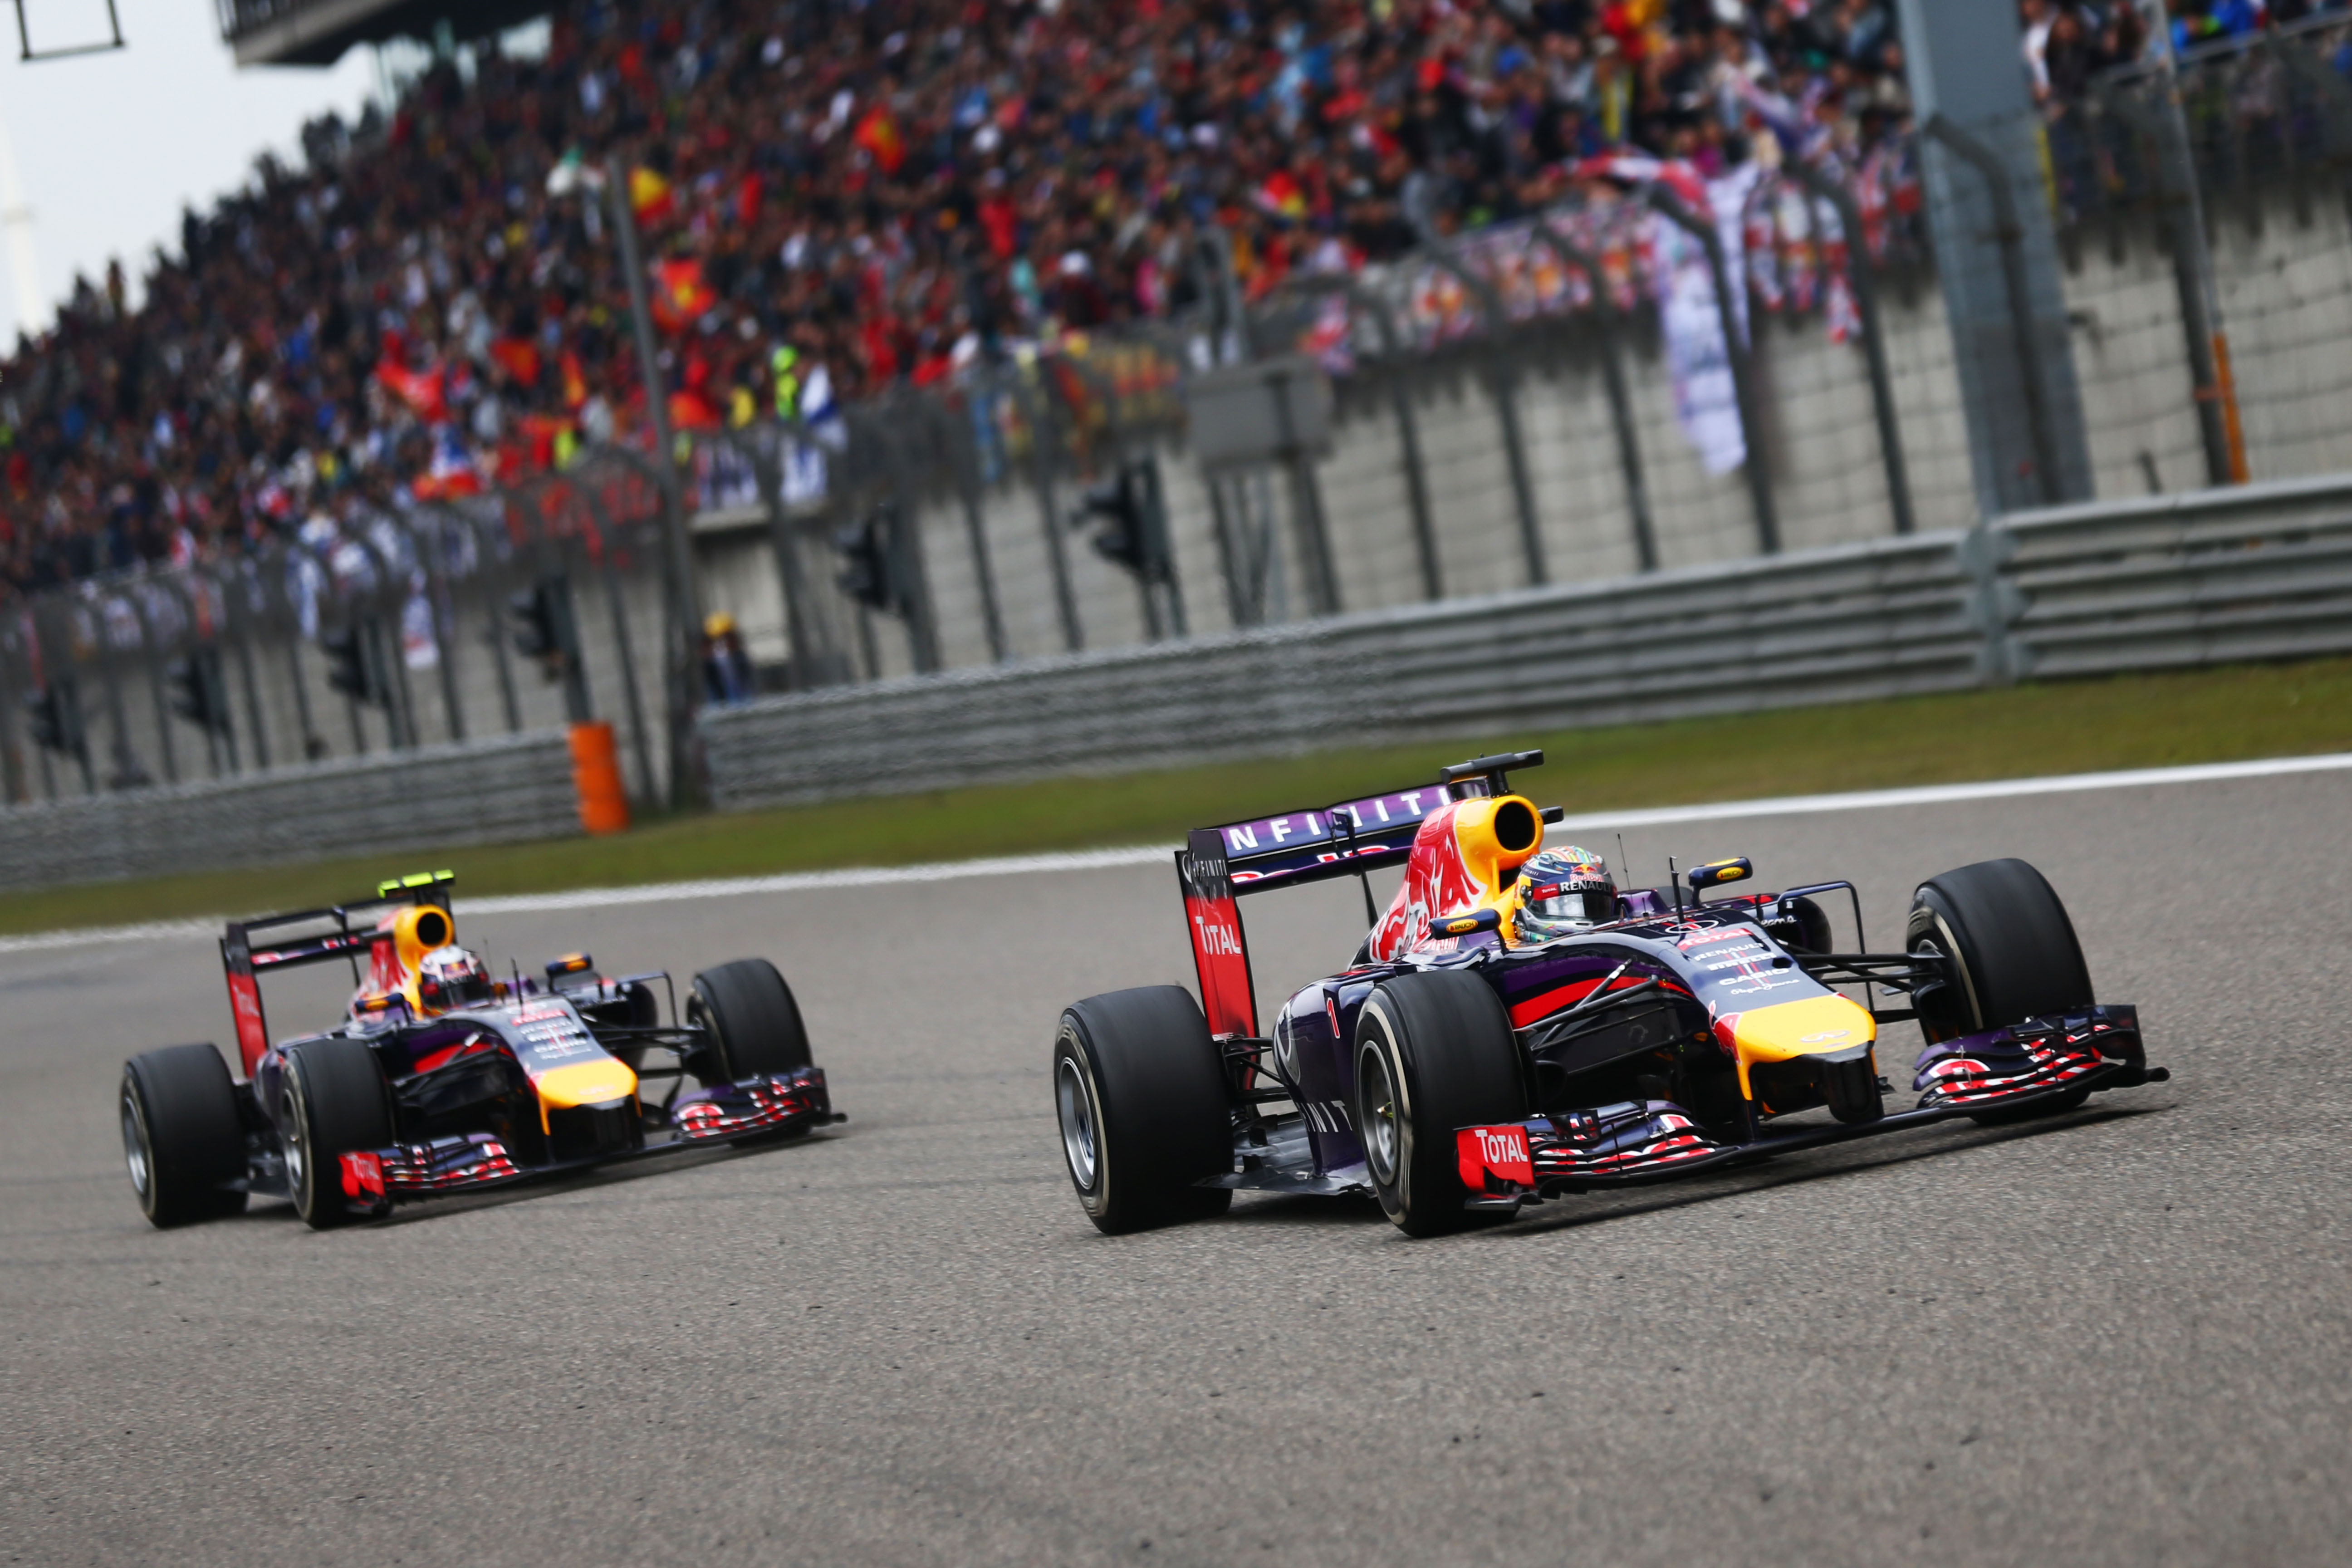 F 1 сайт. Red bull f1 rb10. Red bull Racing rb10. F1 2014 Red bull. Rb10 f1.